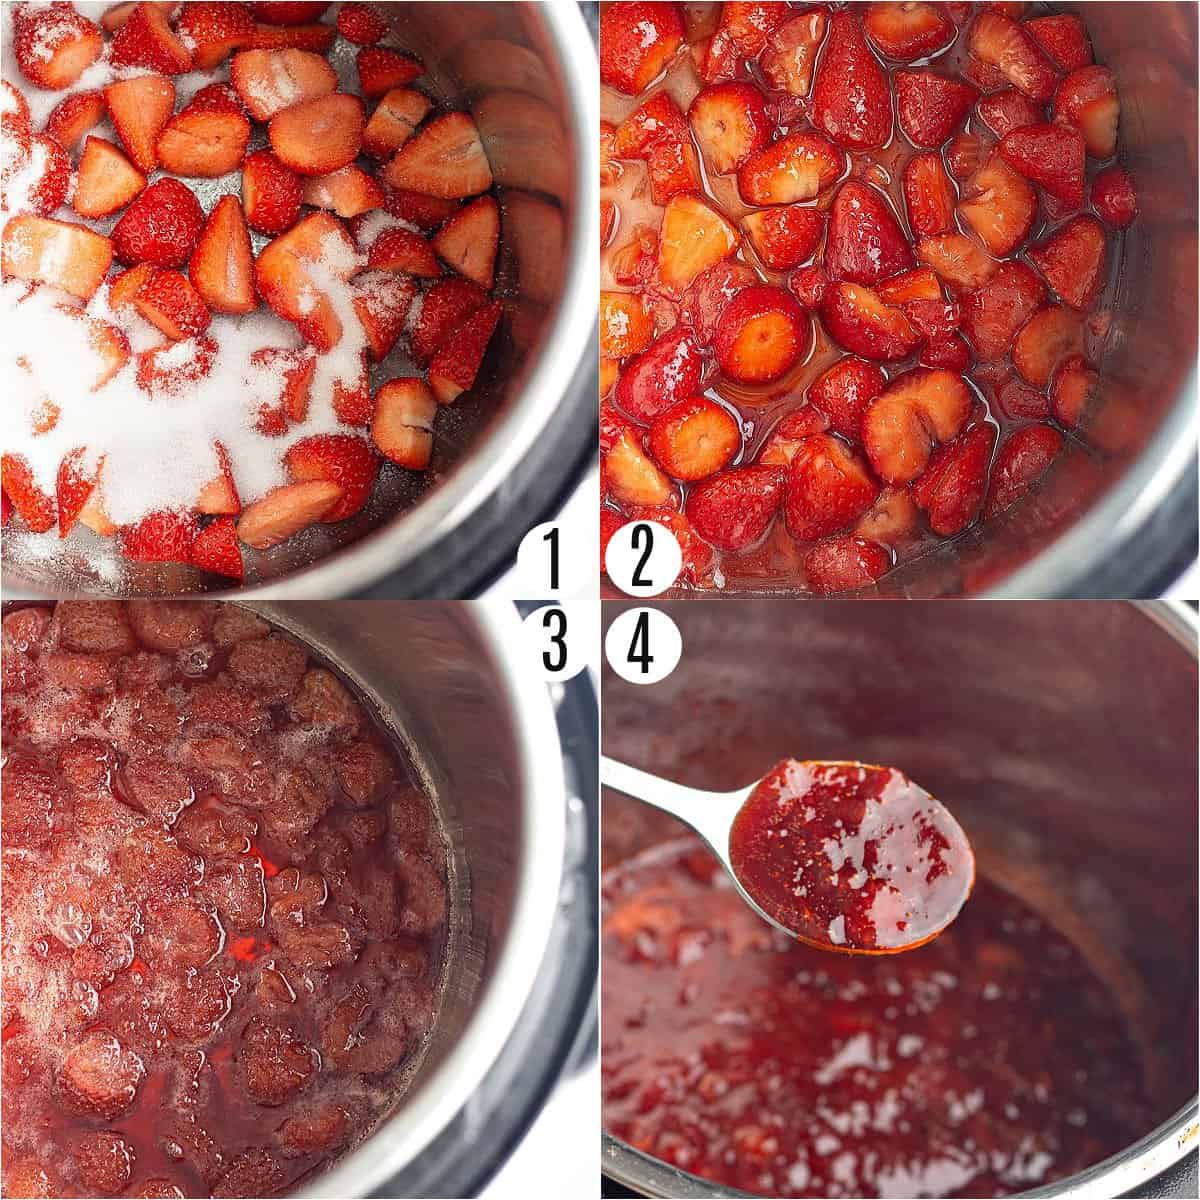 Step by step photos showing how to make strawberry jam in the instant pot.